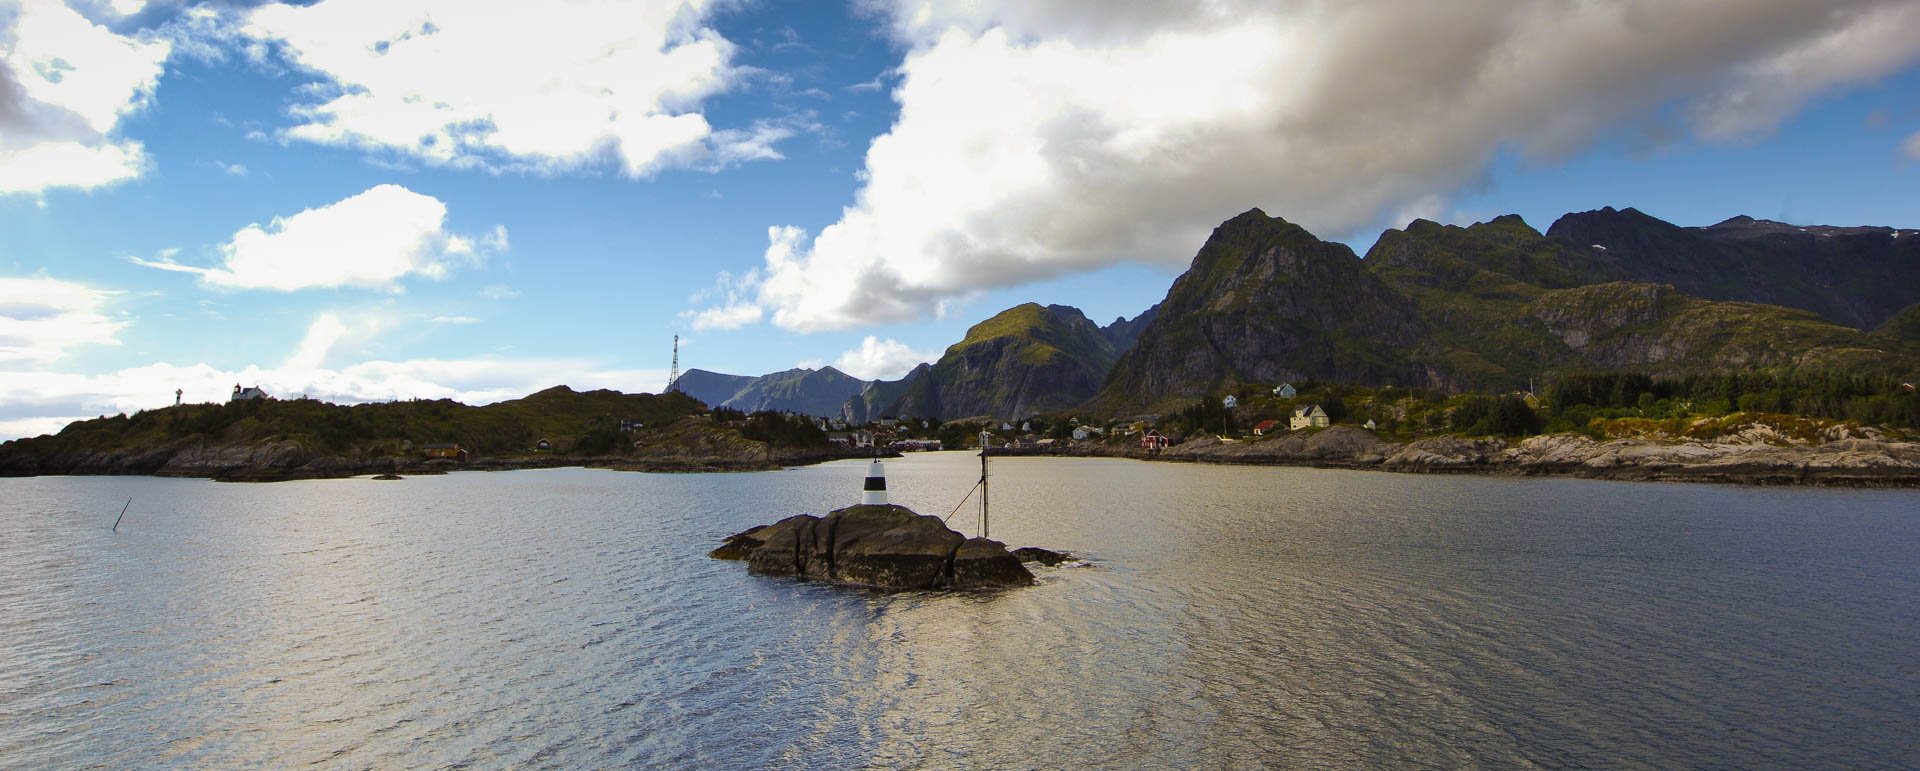 Approaching the Lofoten, weather changed completely